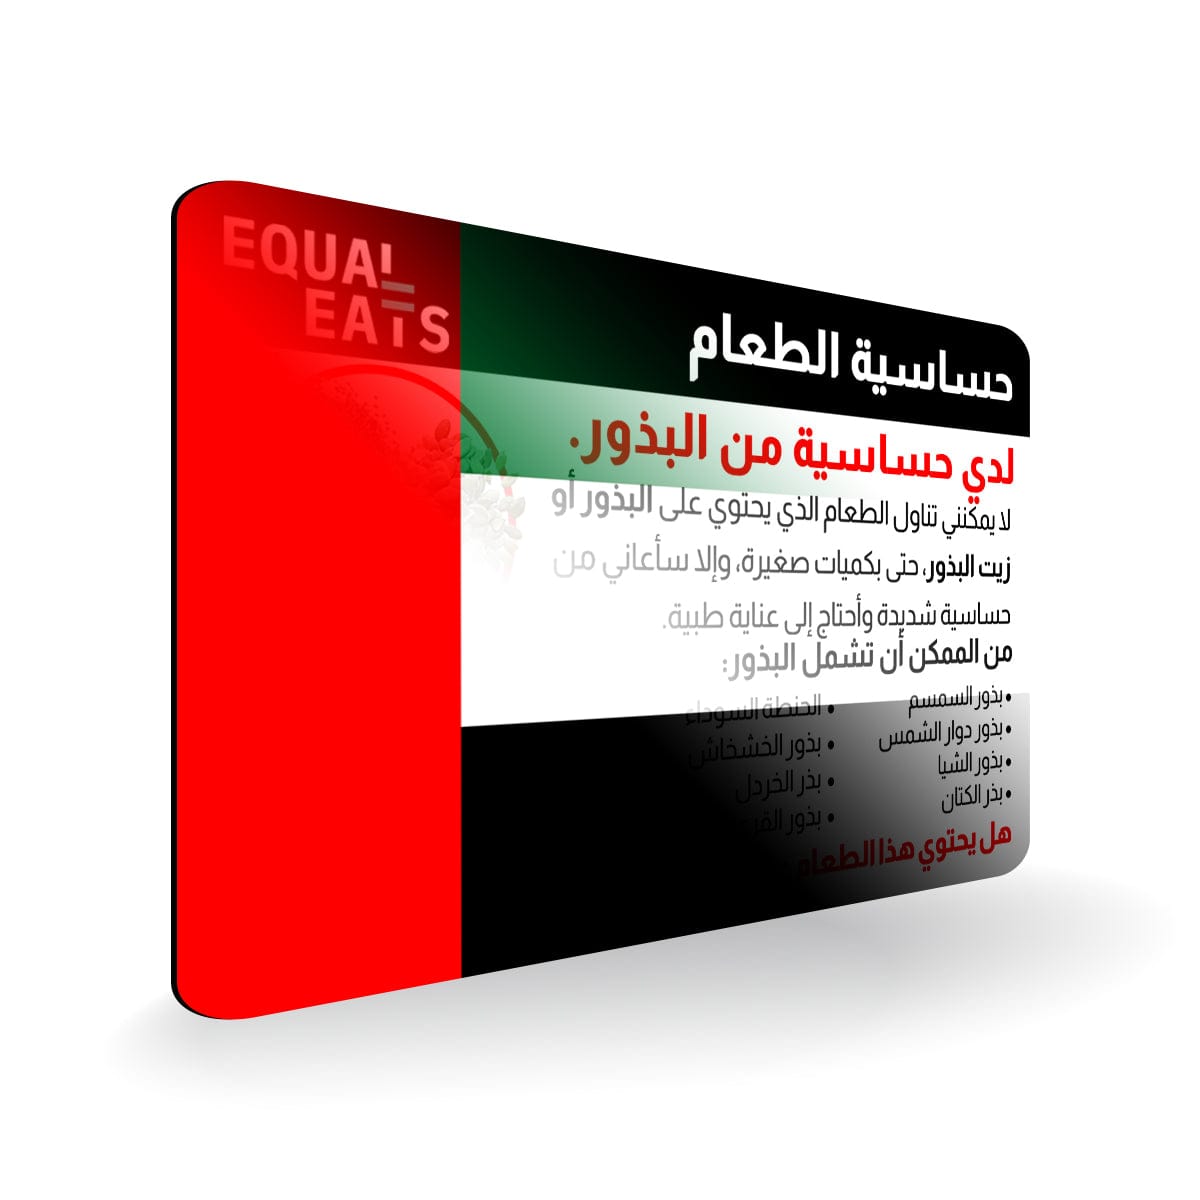 Seed Allergy in Arabic. Seed Allergy Card for Egypt